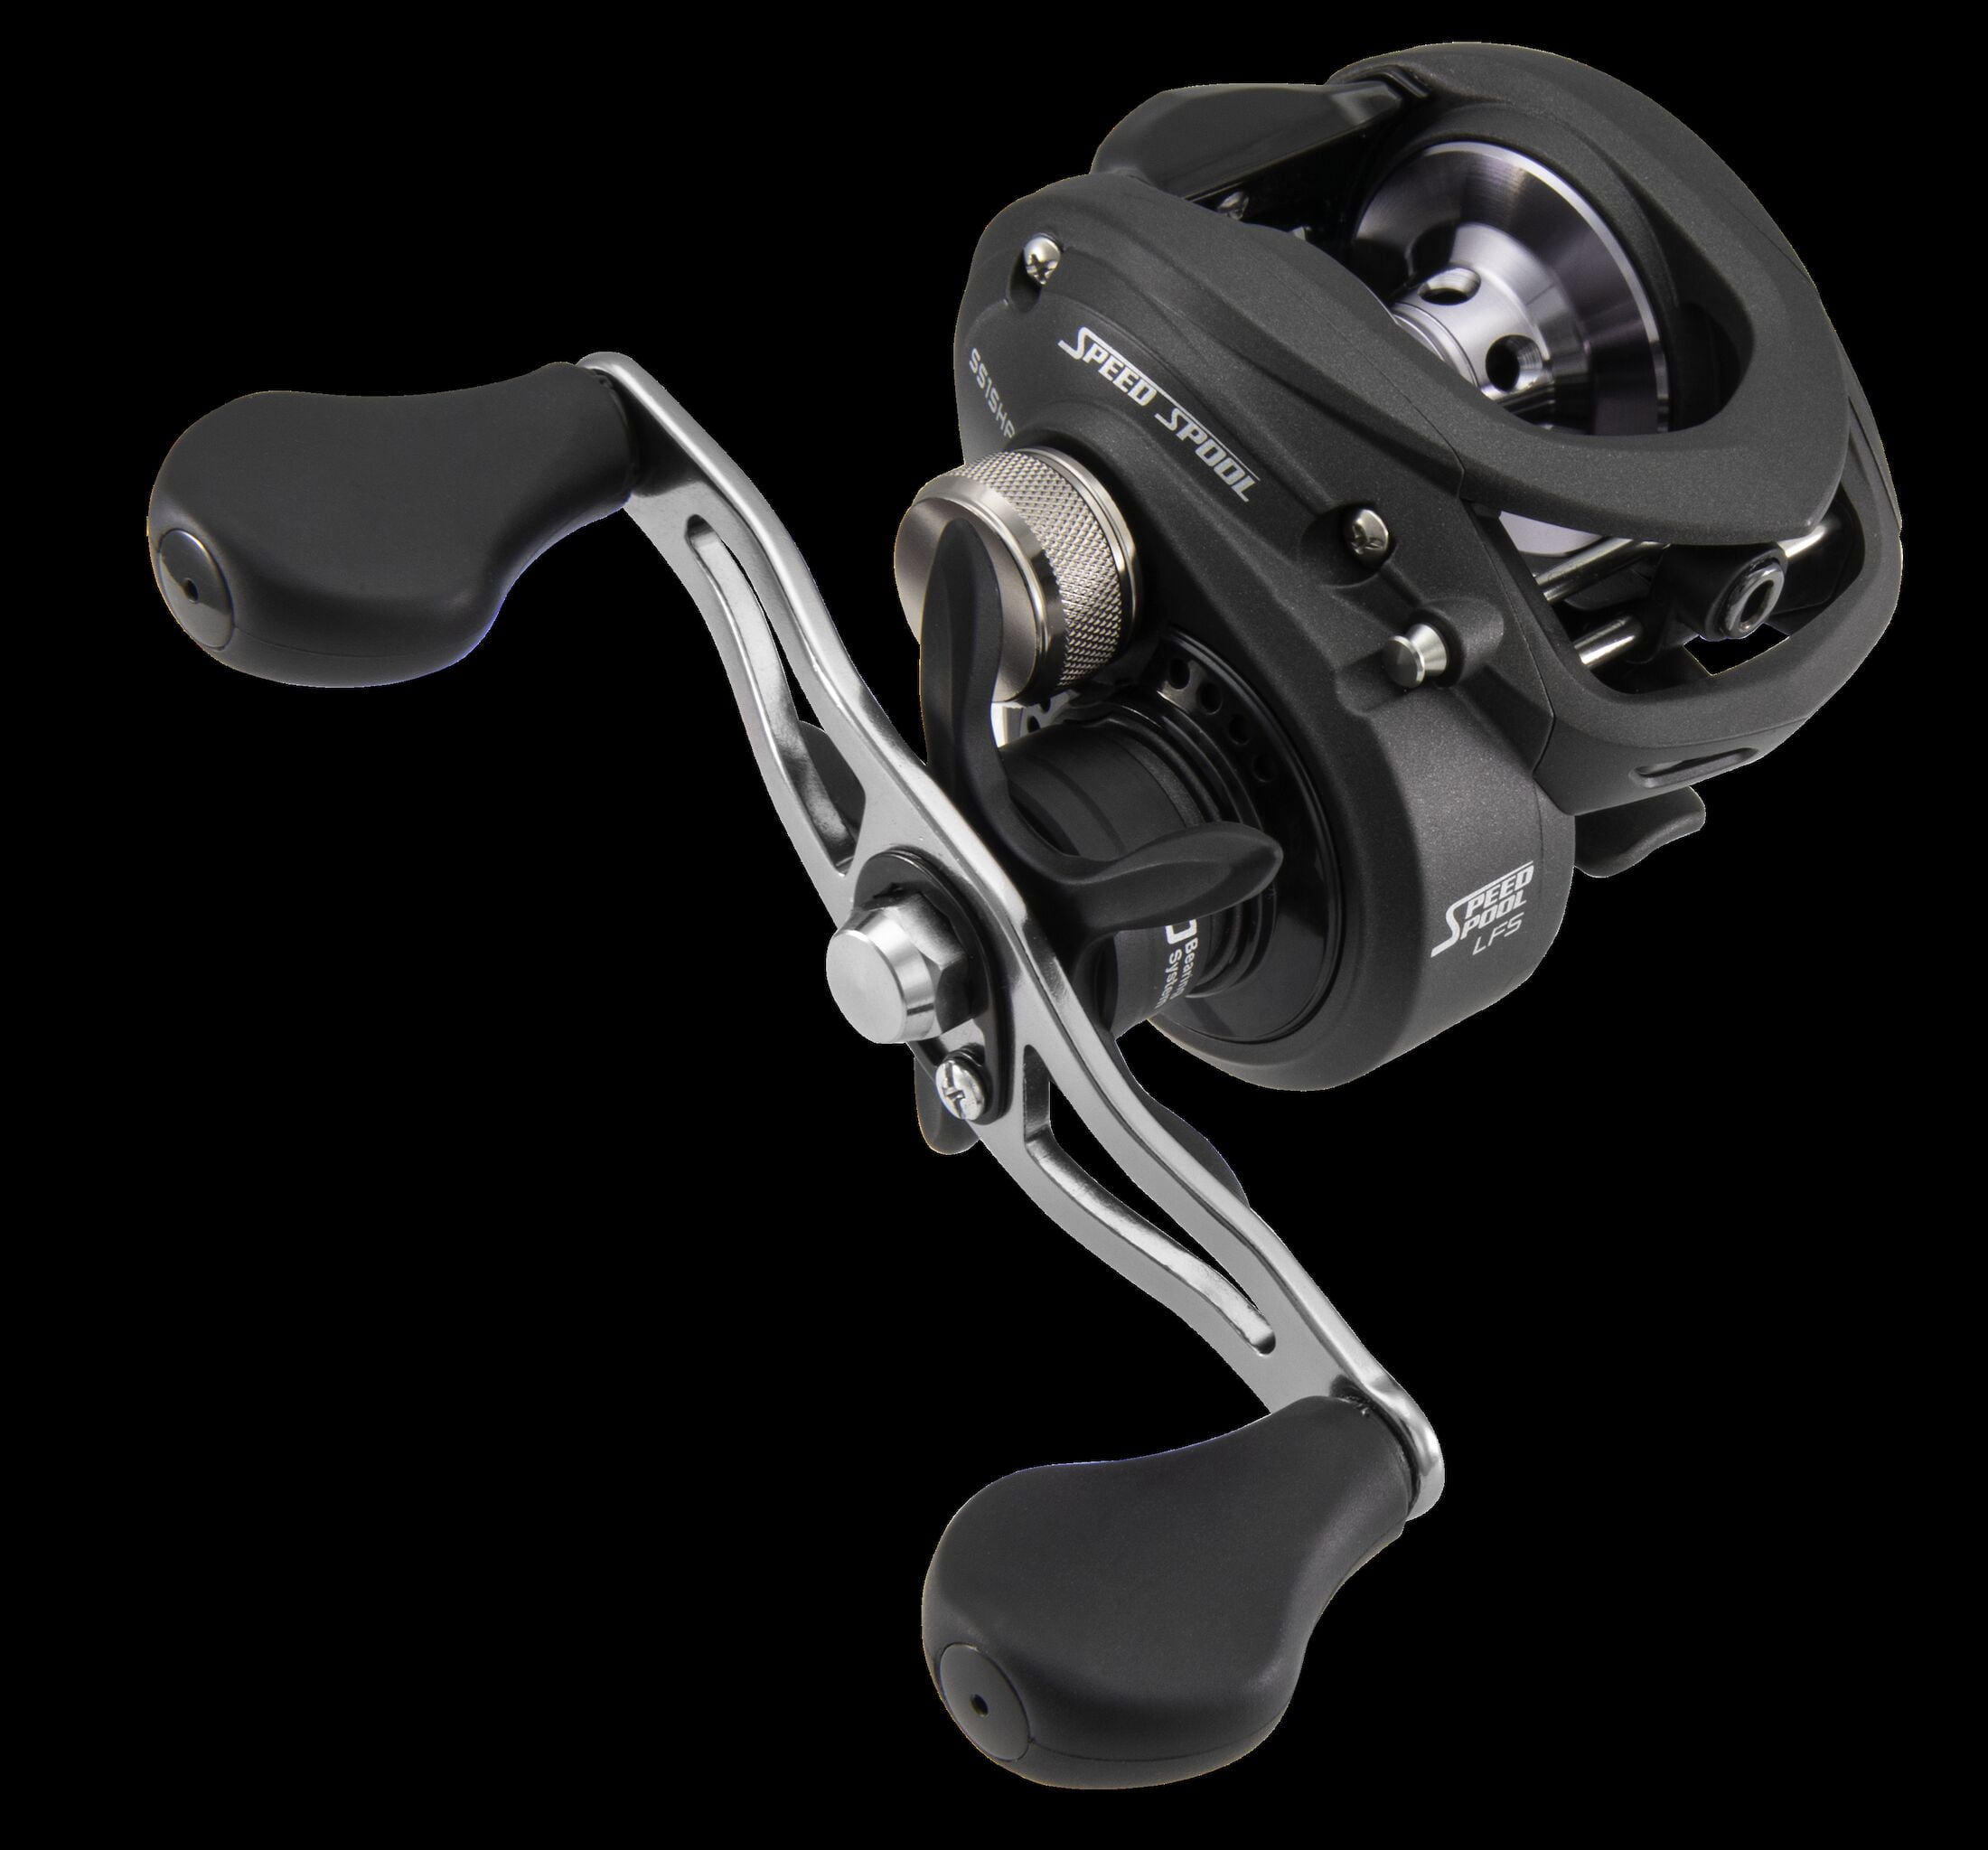 Lew's Speed Spool LFS Baitcast Fishing Reel, Right-Hand Retrieve, 7.5:1  Gear Ratio, 10 Bearing System with Stainless Steel Double Shielded Ball